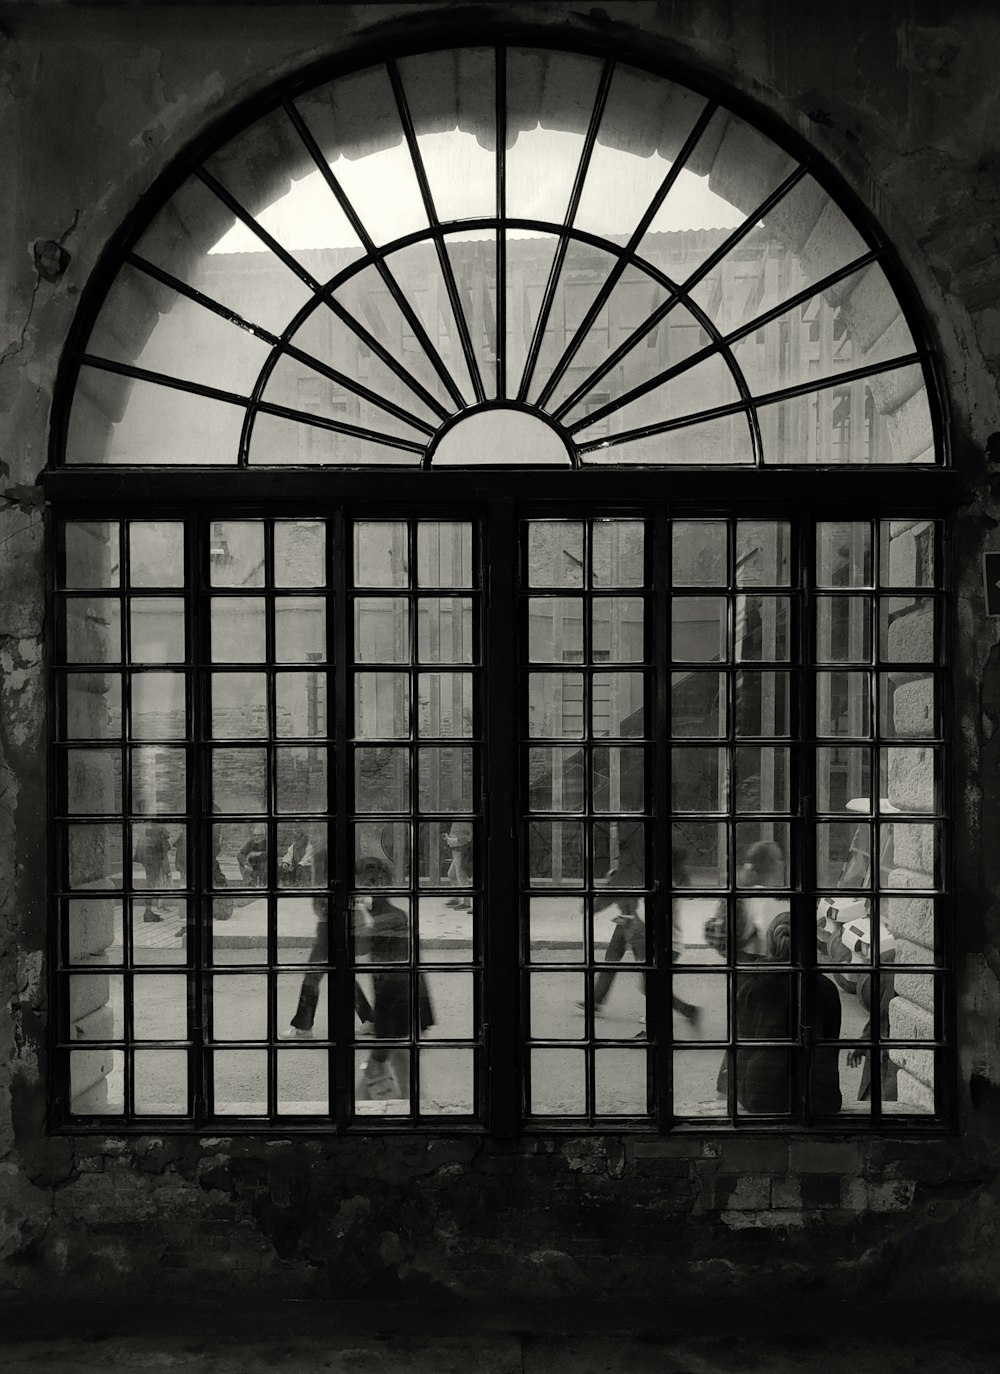 a black and white photo of a large window with a group of people inside